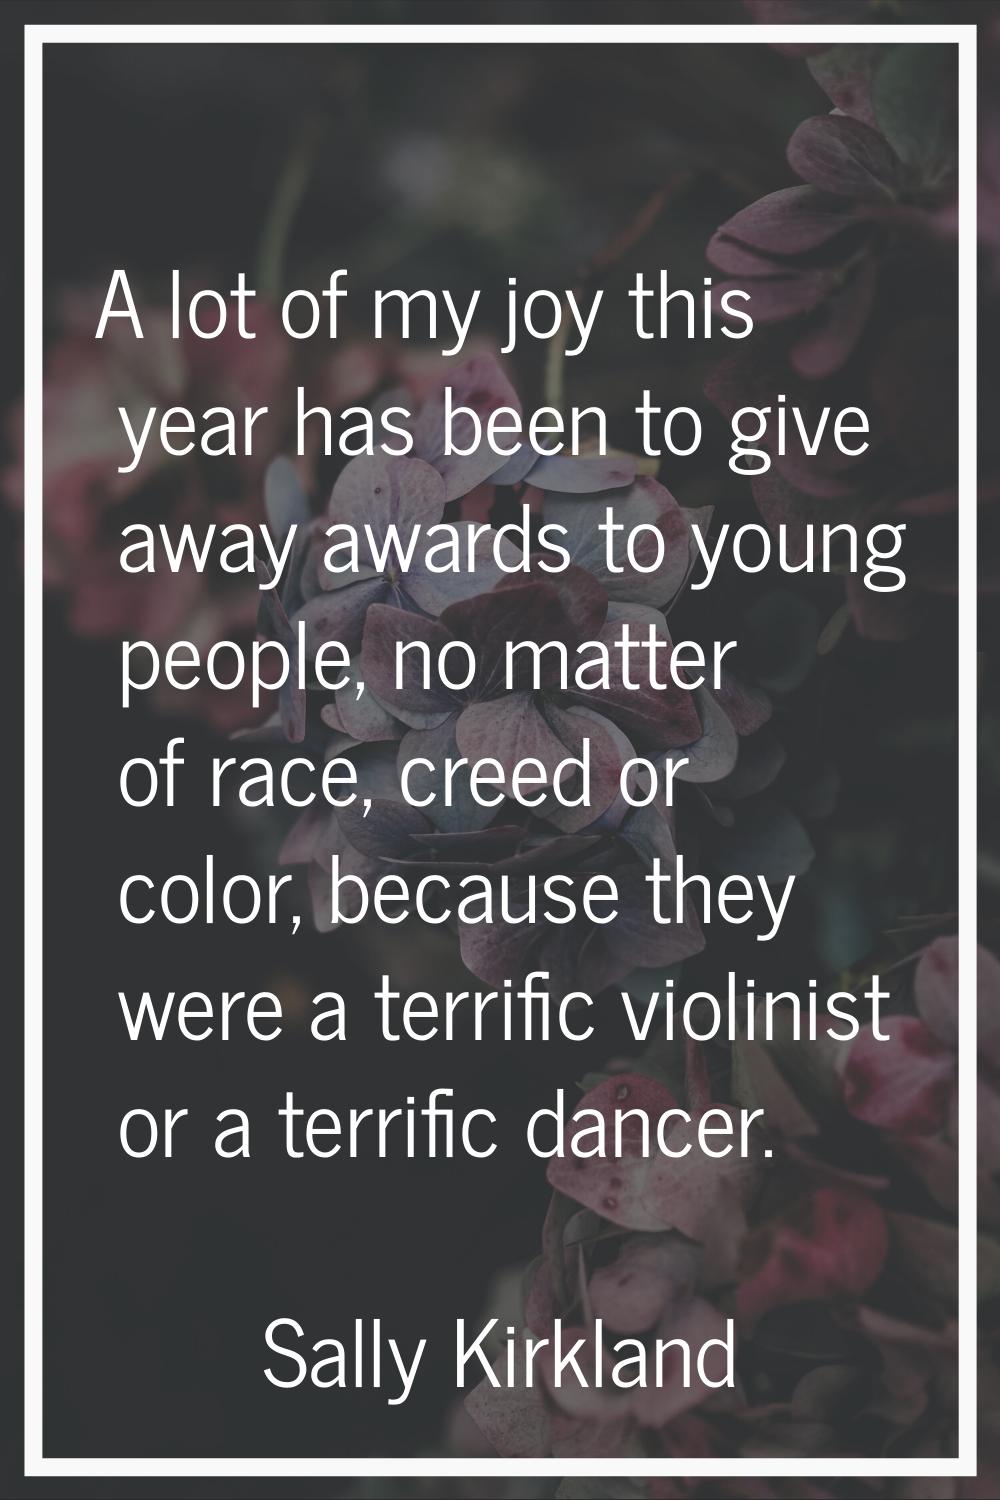 A lot of my joy this year has been to give away awards to young people, no matter of race, creed or